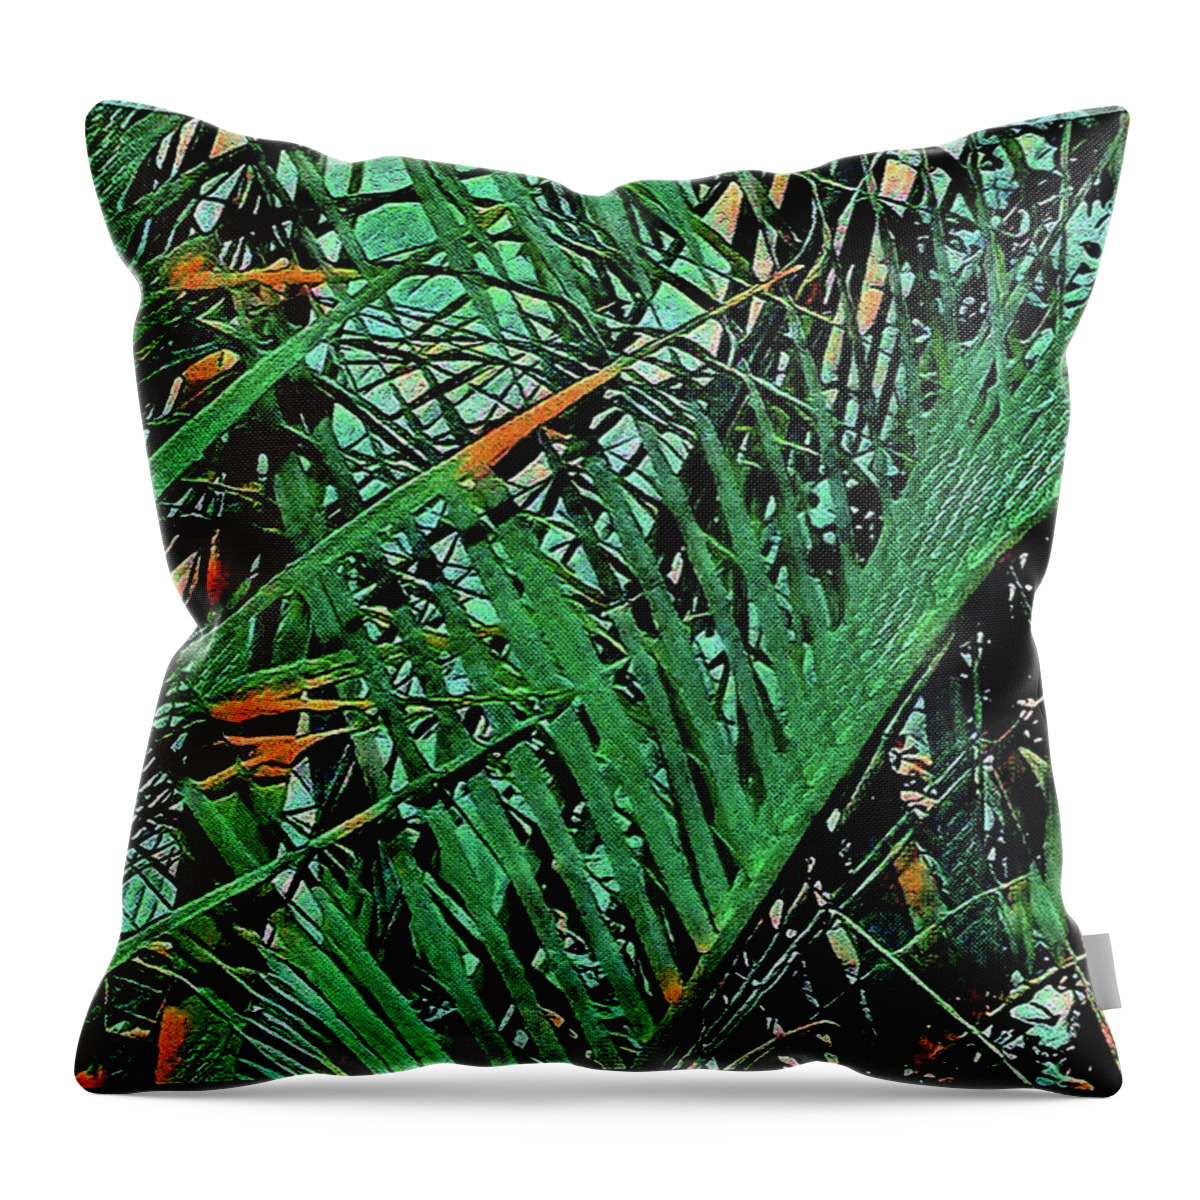 Palm Throw Pillow featuring the digital art Emerald Palms by Mindy Newman